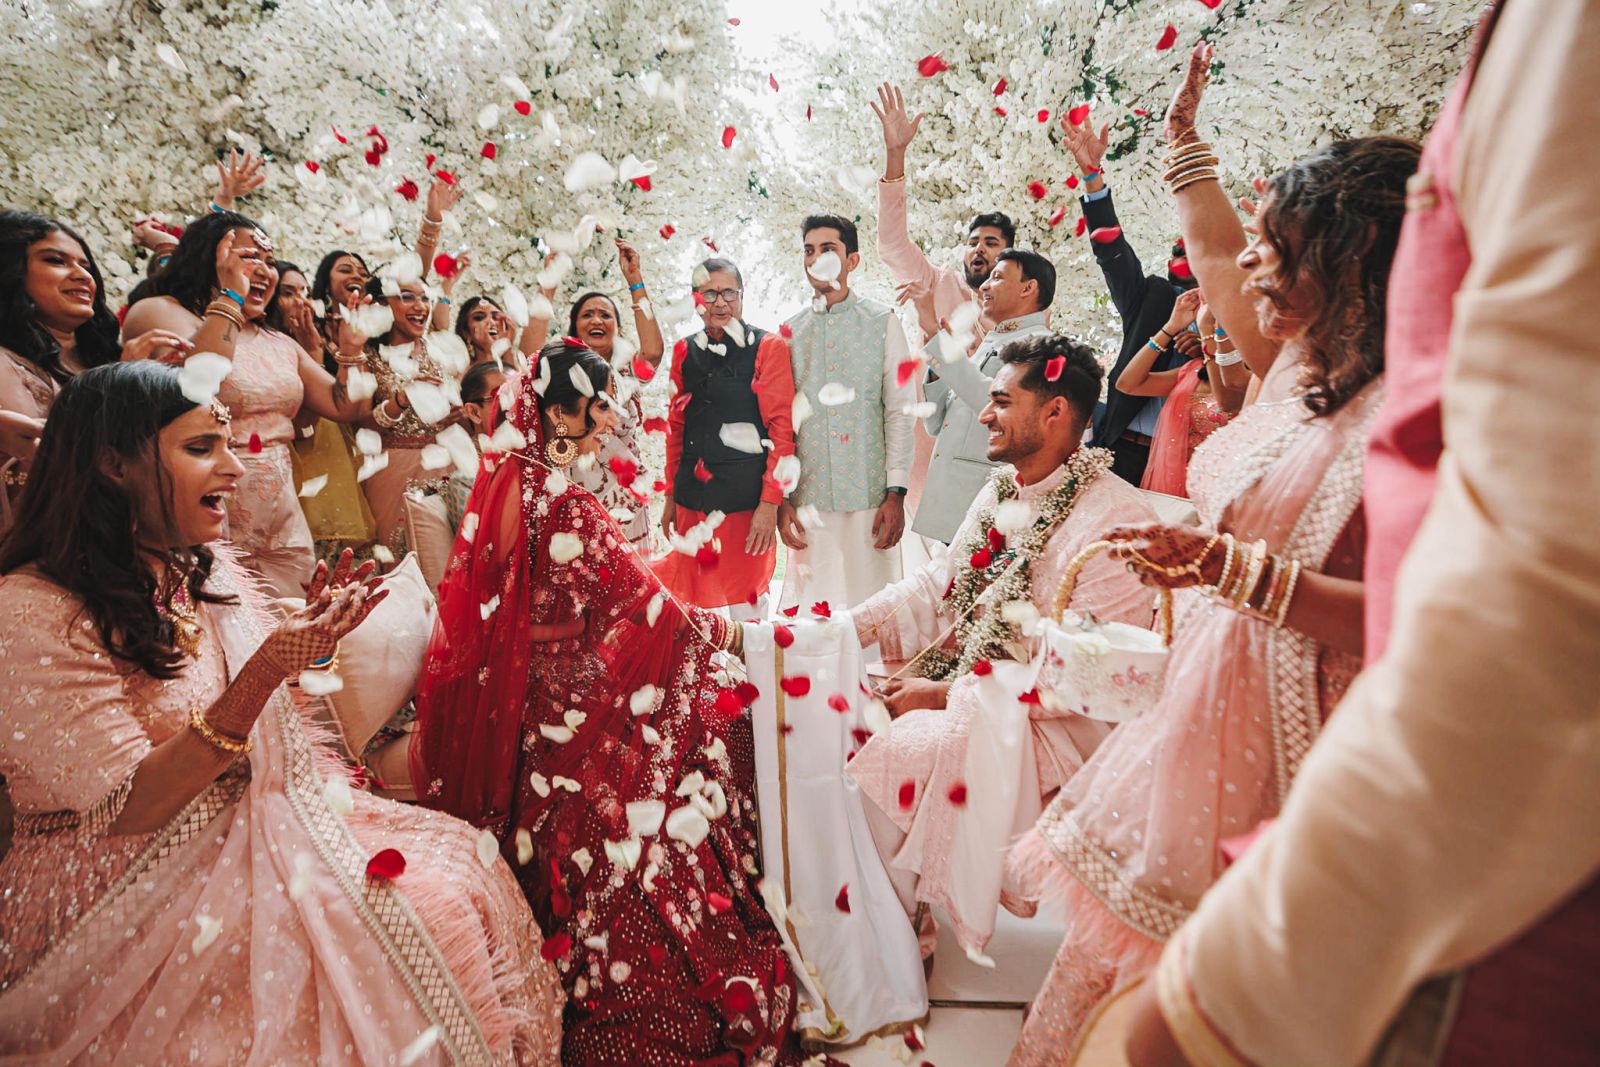 Indian Wedding Family Photos and Images & Pictures | Shutterstock